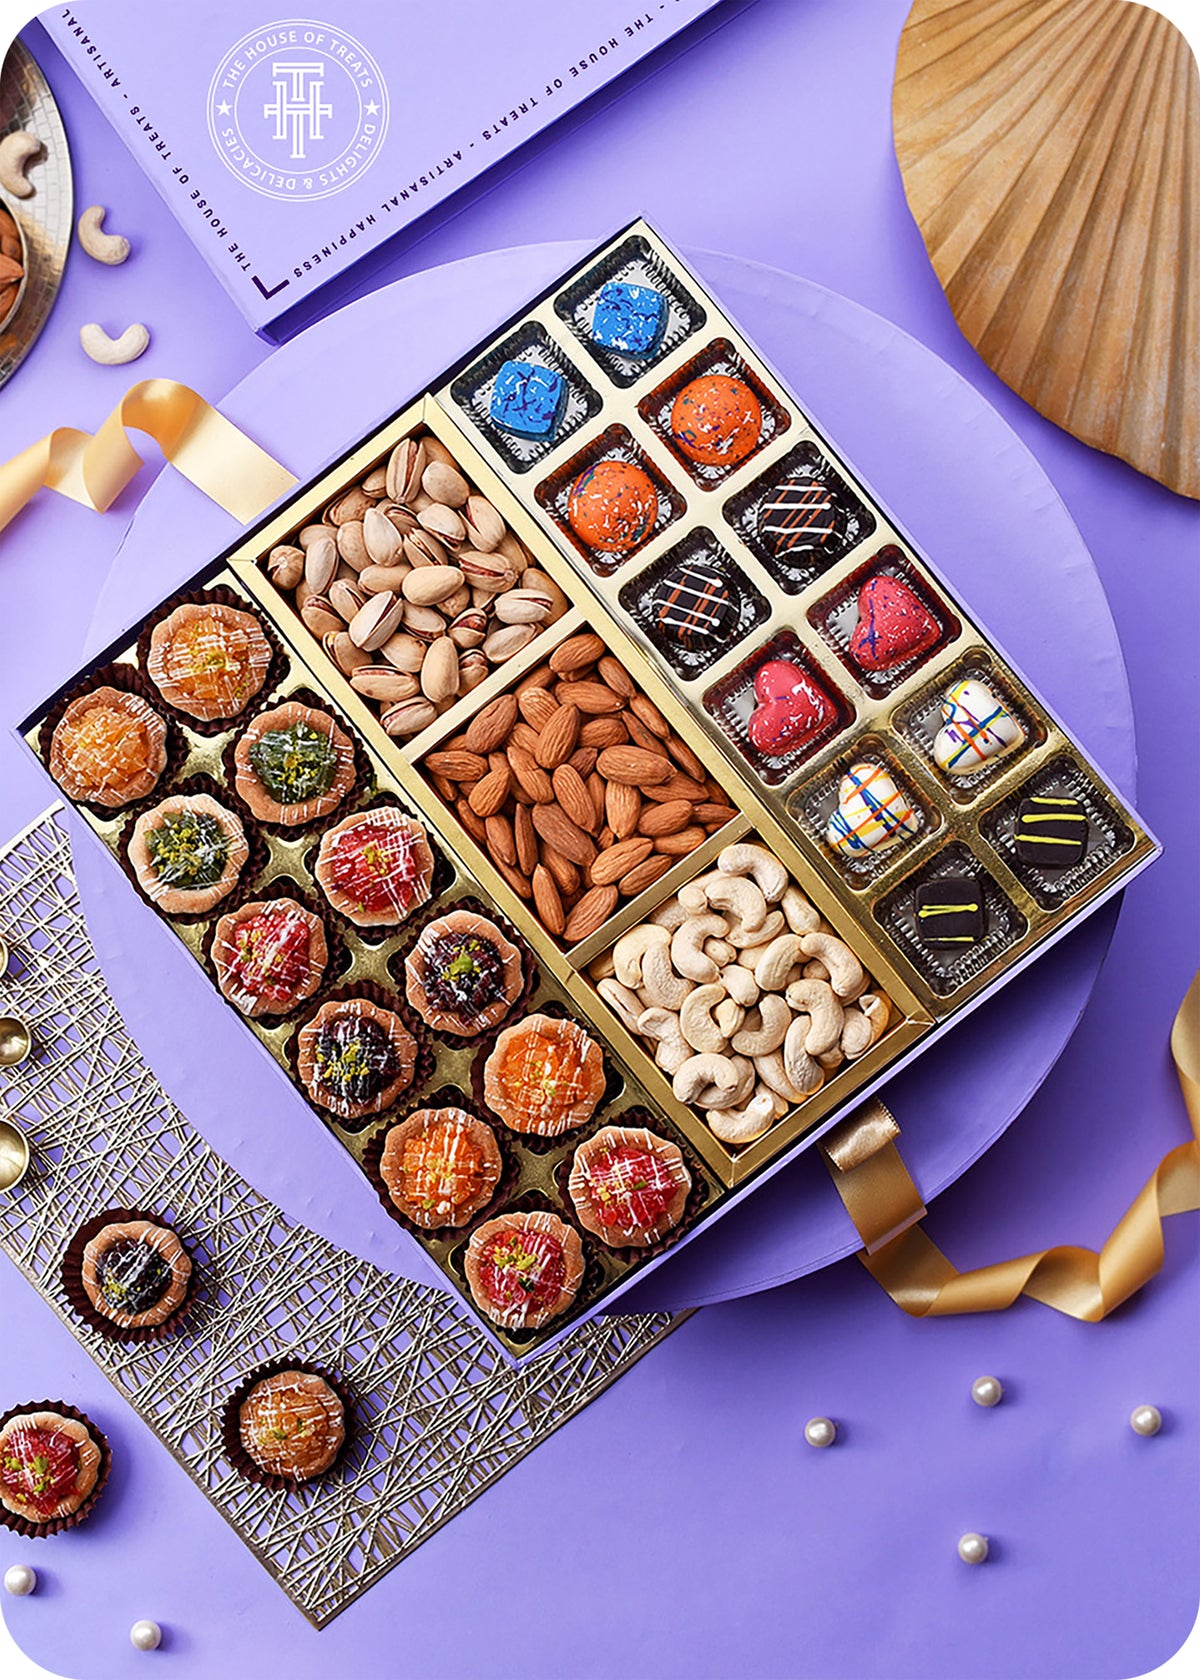 Tart Bliss Delights : Chocolates & Dry Fruits